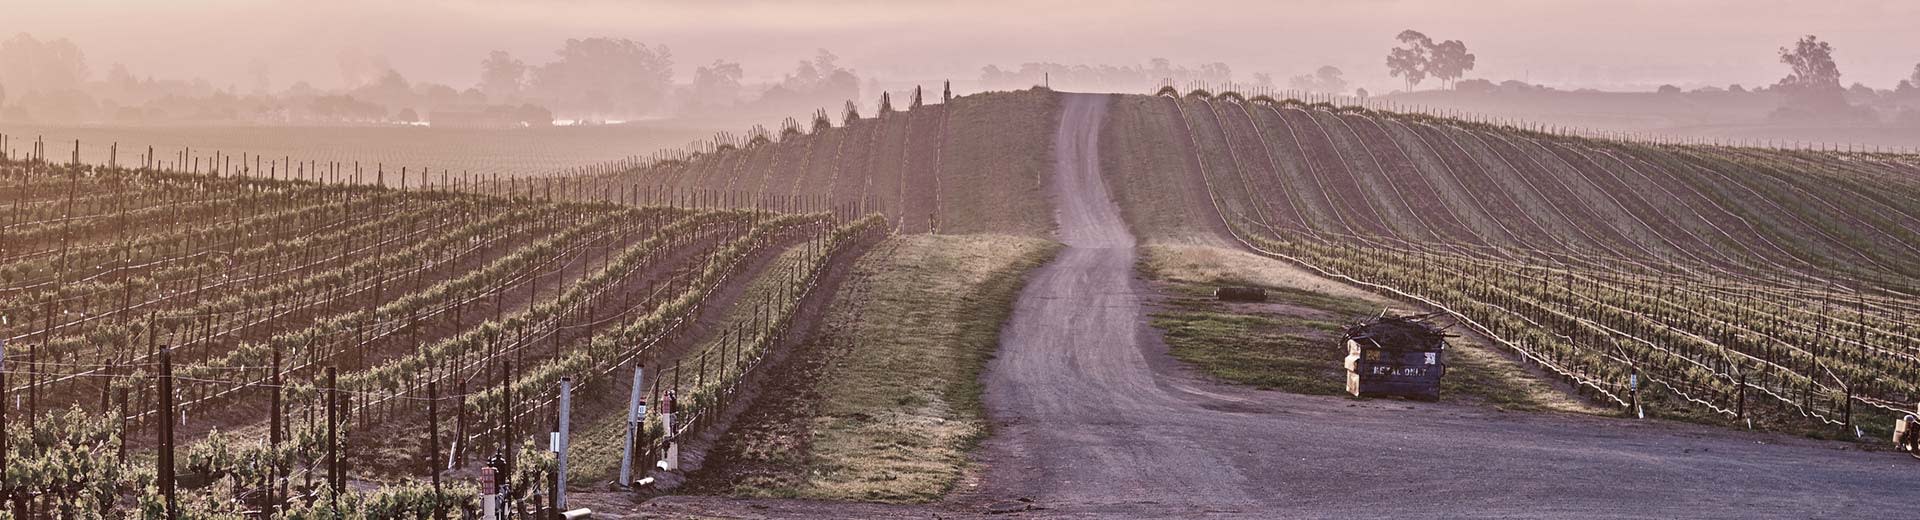 The rolling vineyards of Napa in the evening light.